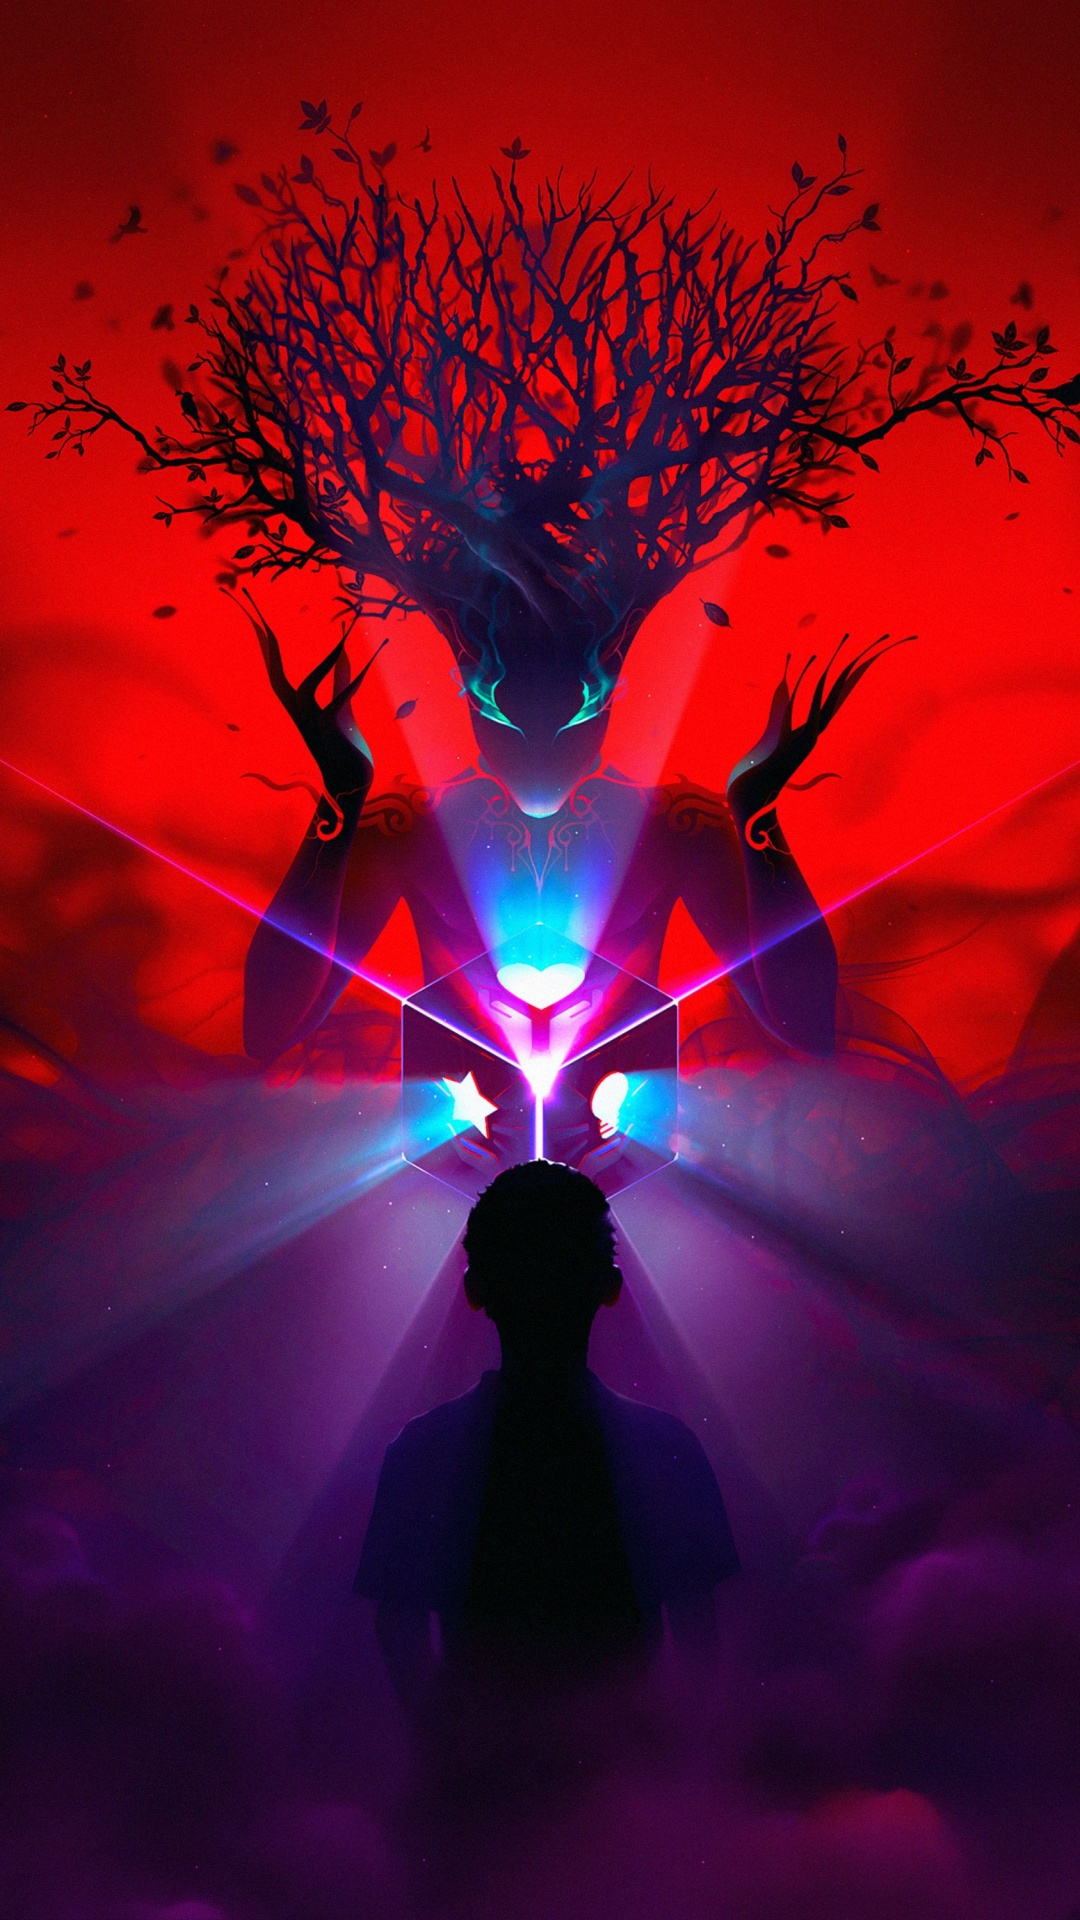 Silhouette of Man Standing Under Blue and Purple Lights. Wallpaper in 1080x1920 Resolution